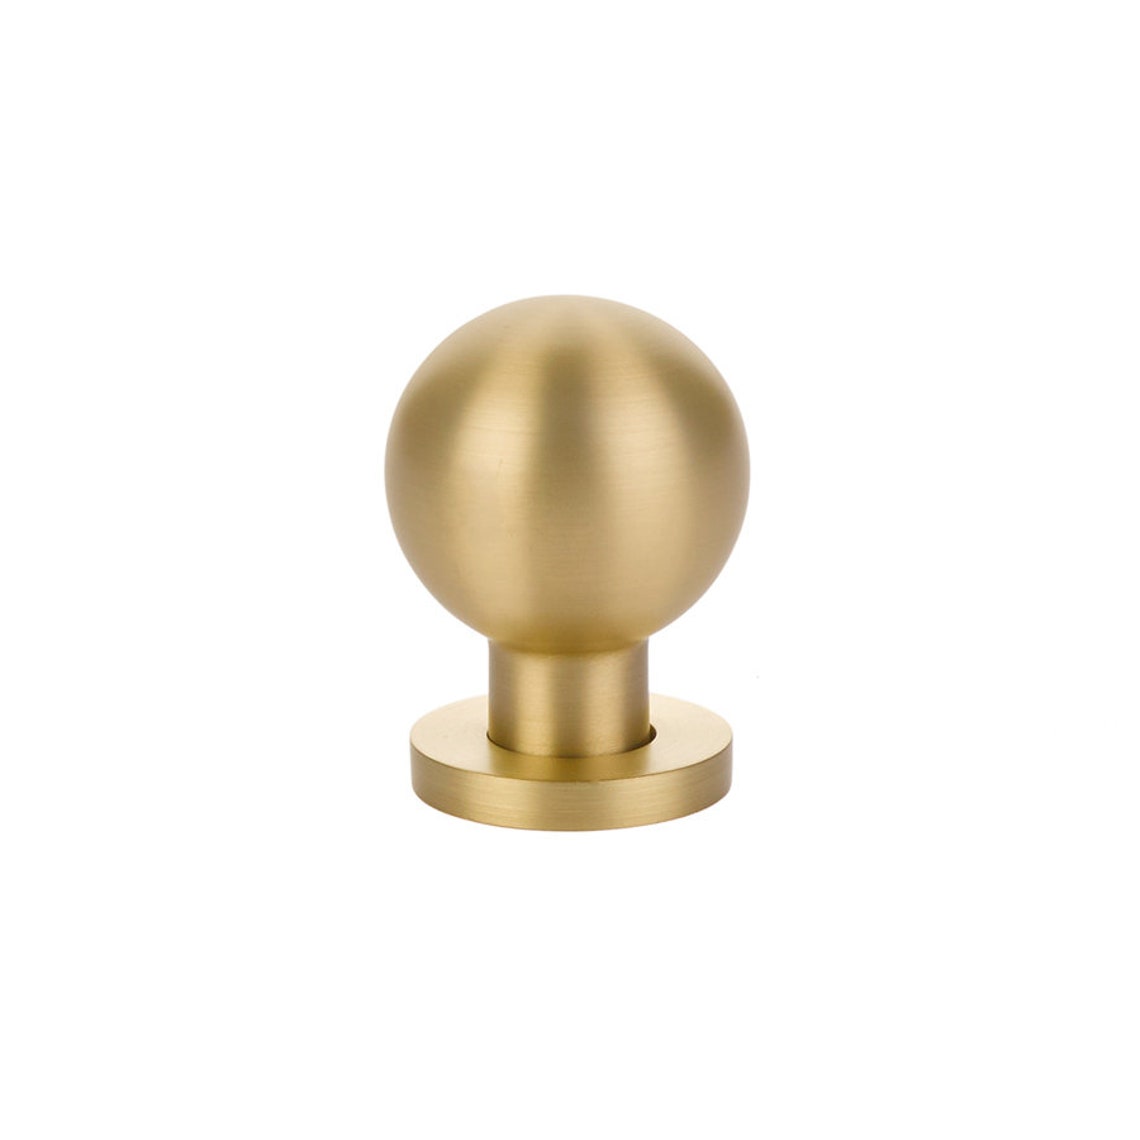 Omni Cabinet Knobs and Drawer Pulls in Satin Brass